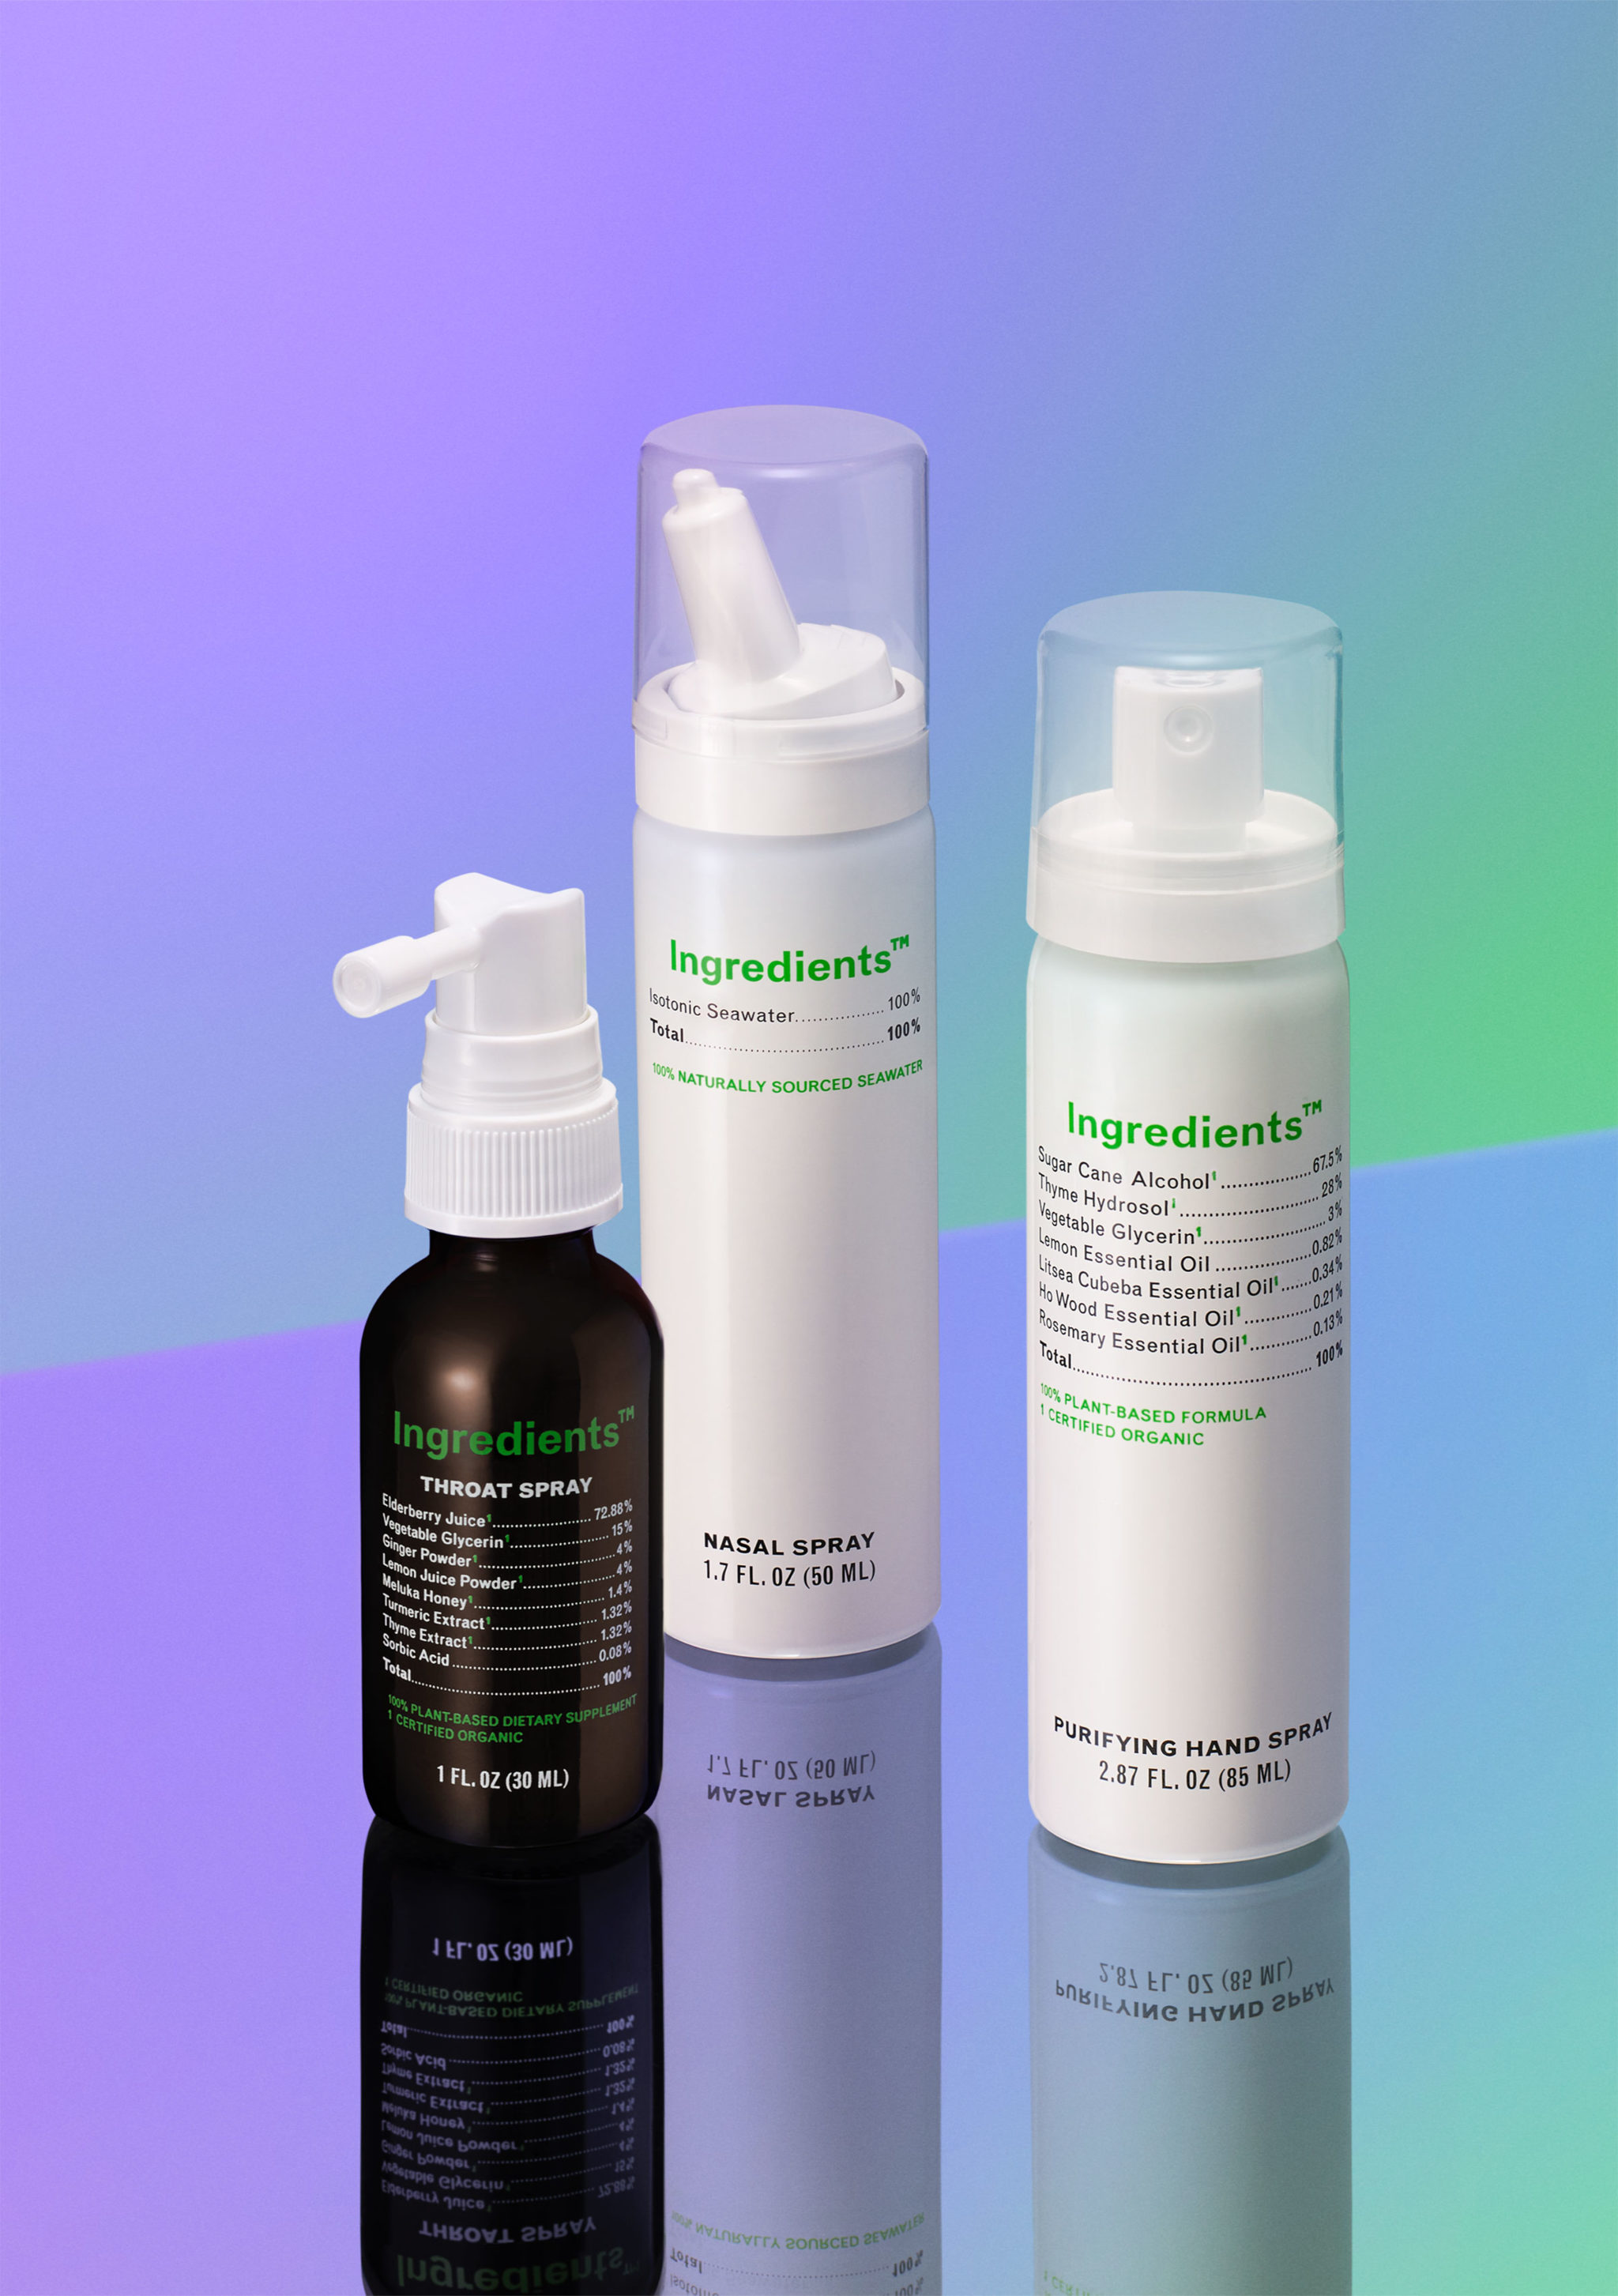 Three Ingredients products sitting on a colourful background